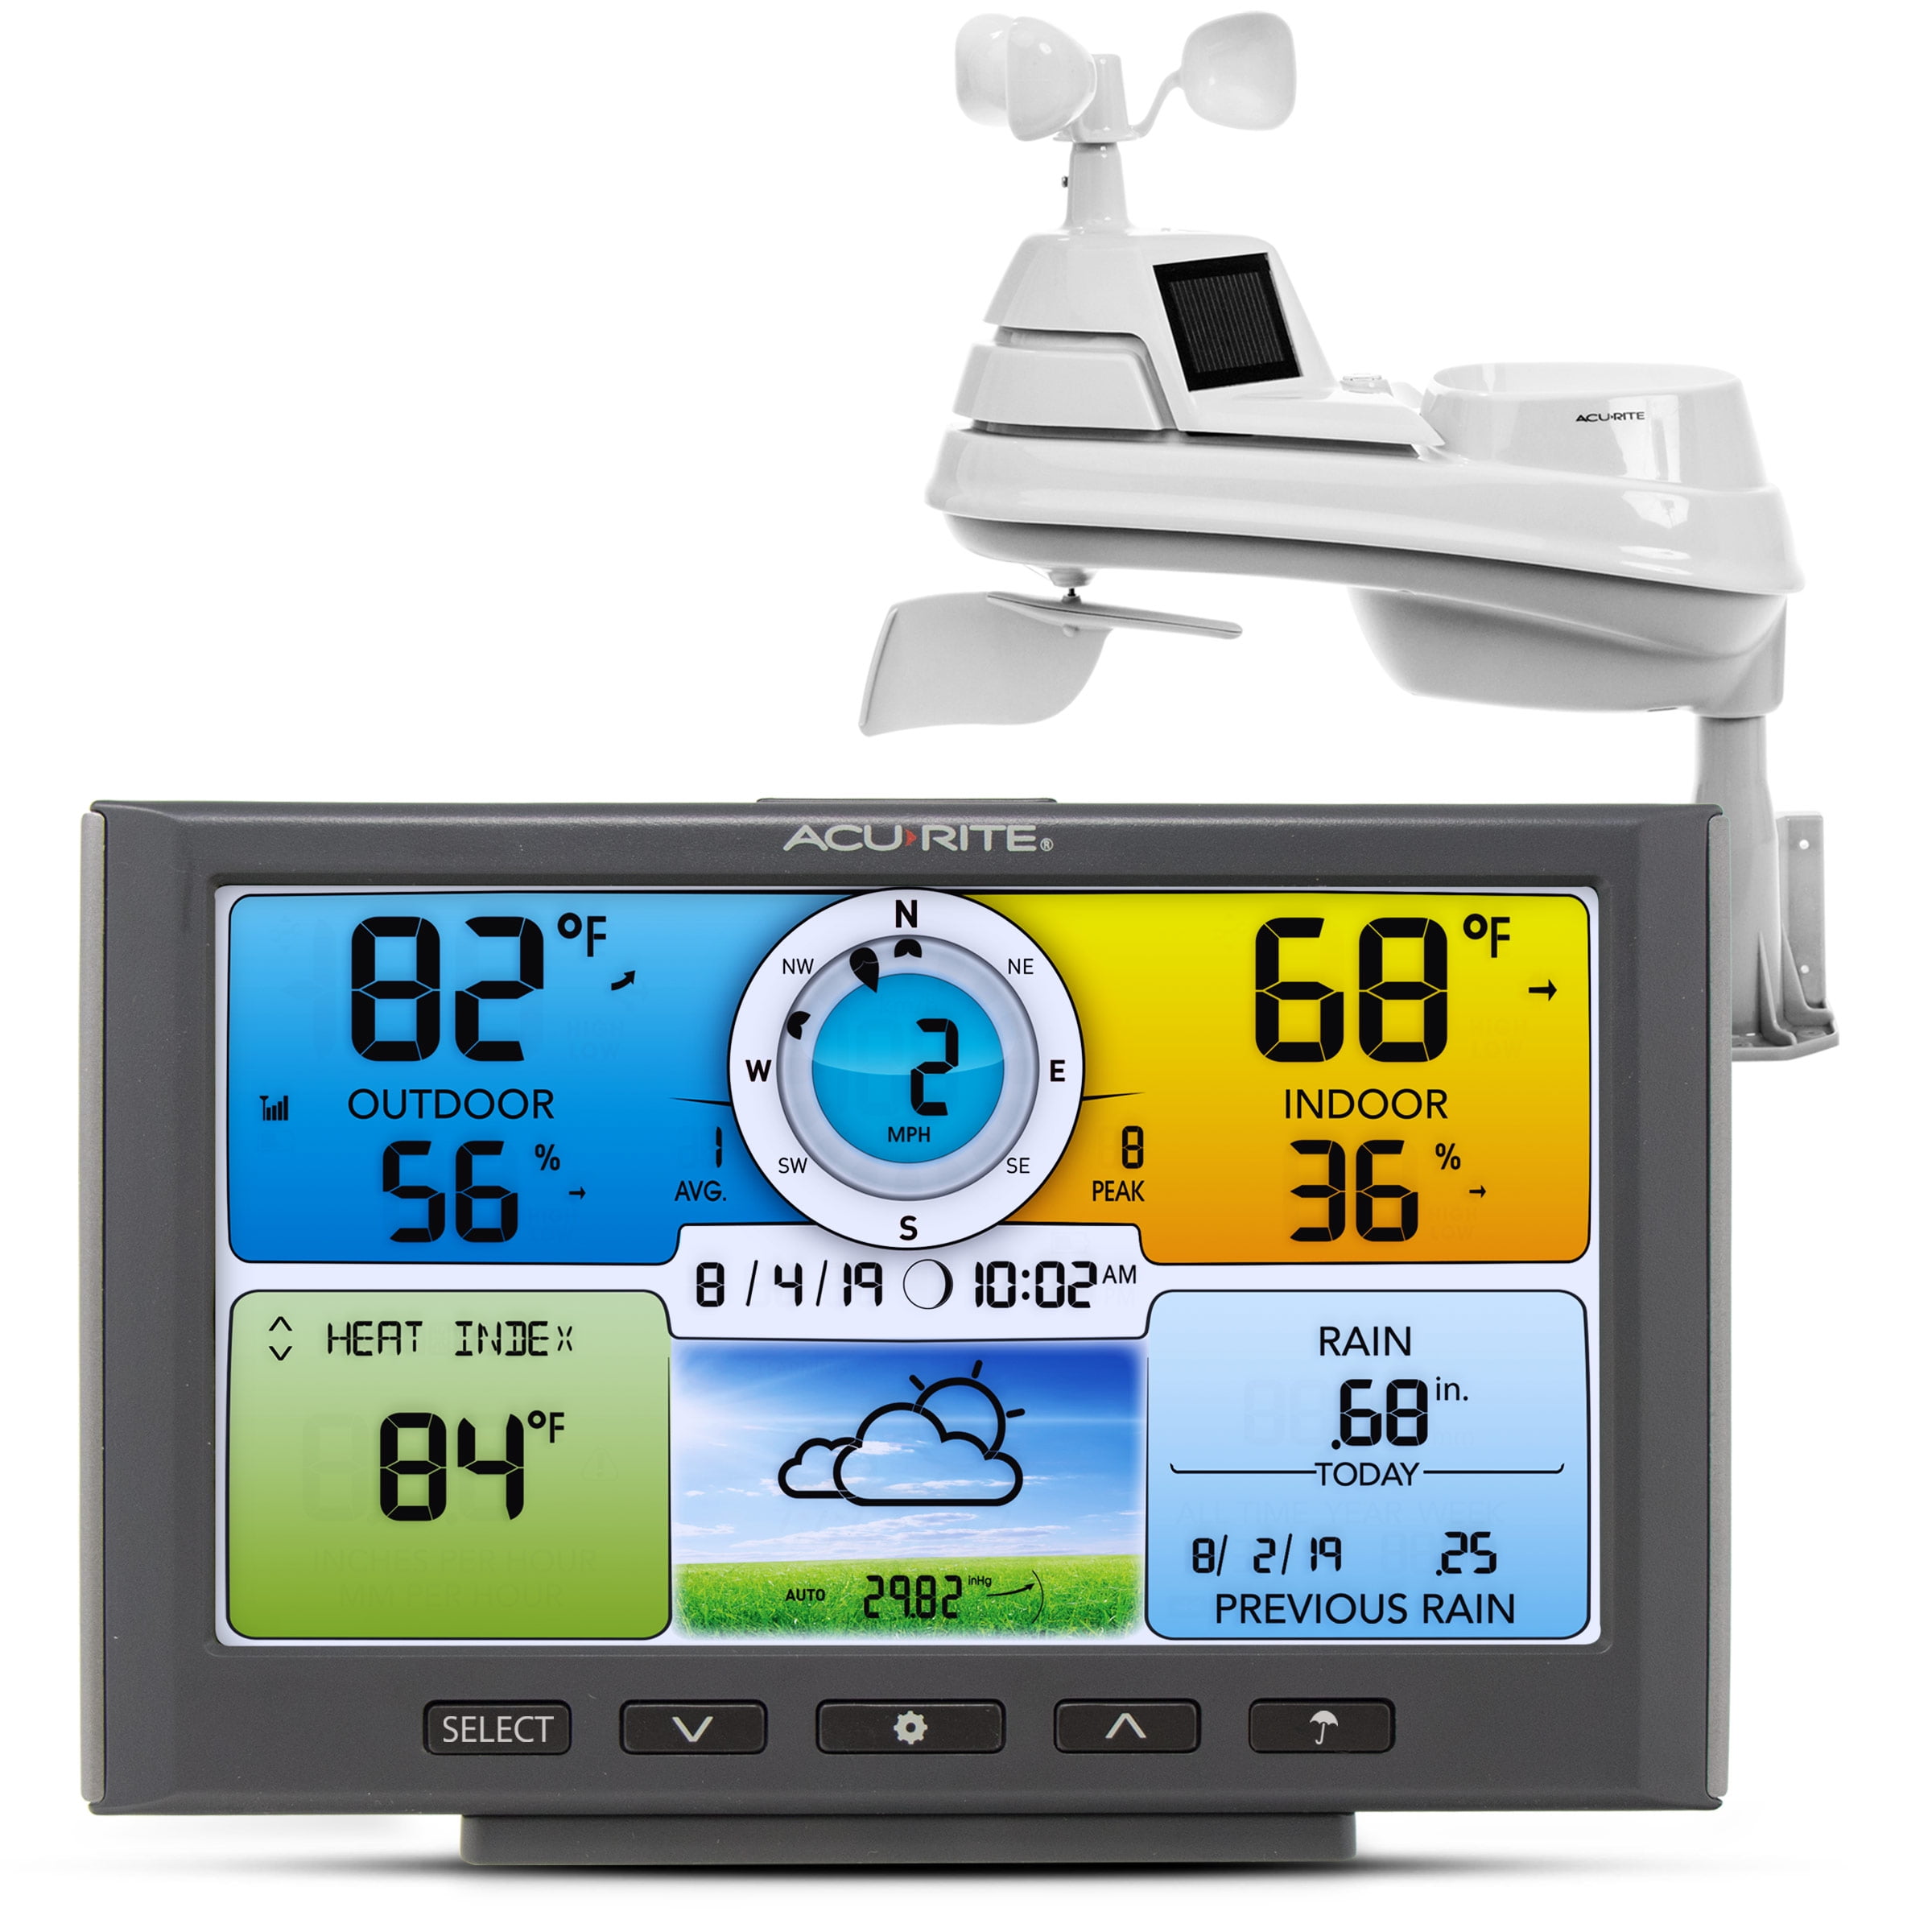 AcuRite 00827 What-to-Wear Wireless Weather Forecaster white, 0.5